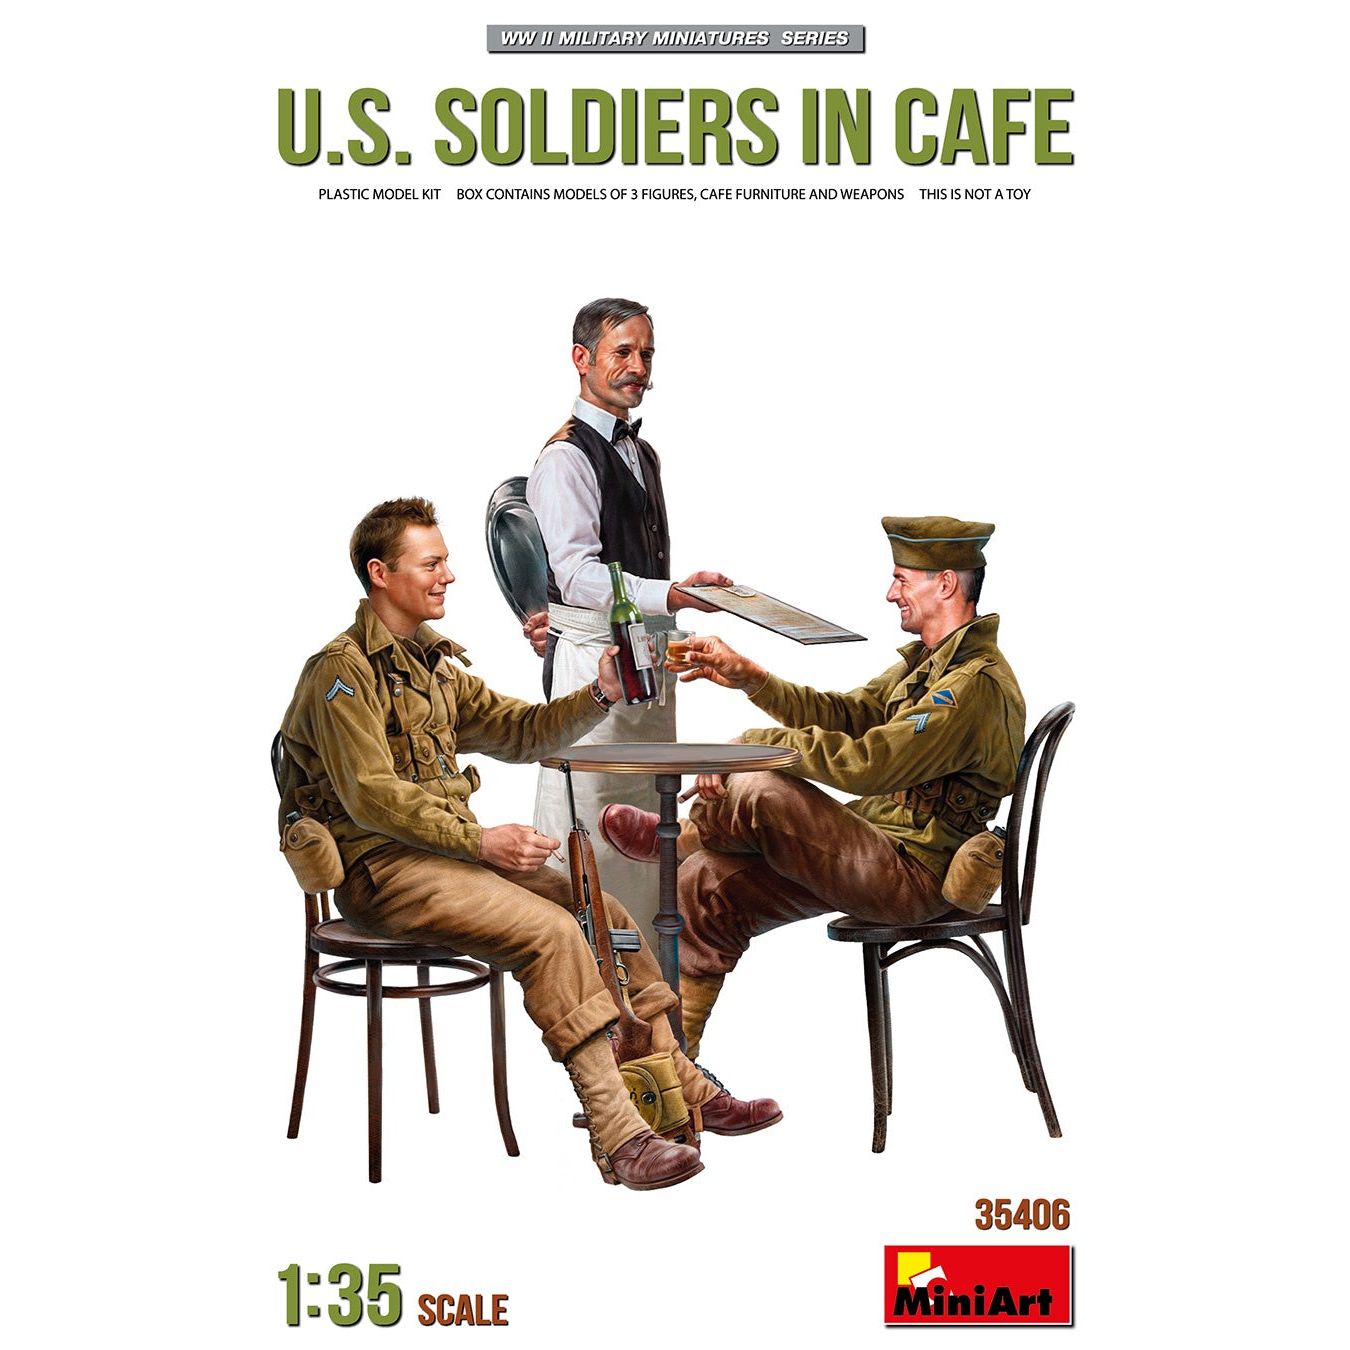 U.S. Soldiers in Cafe 1/35 #35406 by MiniArt